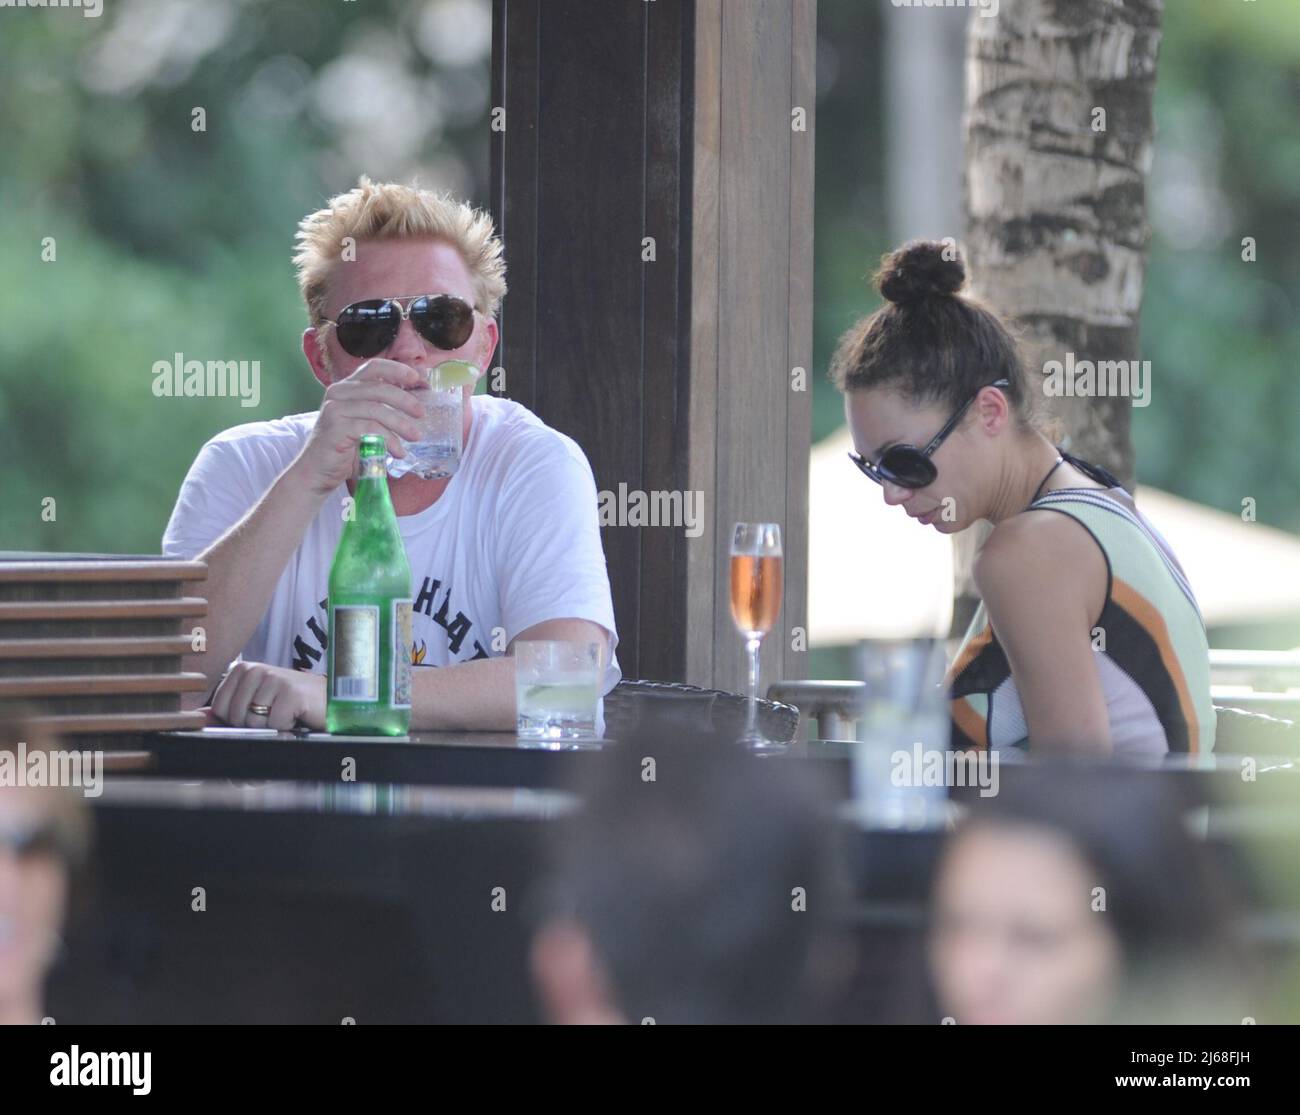 MIAMI BEACH, FL - DECEMBER 21: Tennis great Boris Becker ( AKA Boris Franz Becker)  along with his Wife Sharlely ÔLillyÕ Kerssenberg (model, m. Jun-2009, one son). The former tennis player was spotted relaxing at a hotel in Florida while his wife Sharlely ÔLillyÕ Kerssenberg soaked up the sunshine in a tiny two-piece at their South Beach Hotel.  on December 21, 2011 in Miami Beach, Florida     People:  Boris Becker Sharlely Kerssenberg Stock Photo